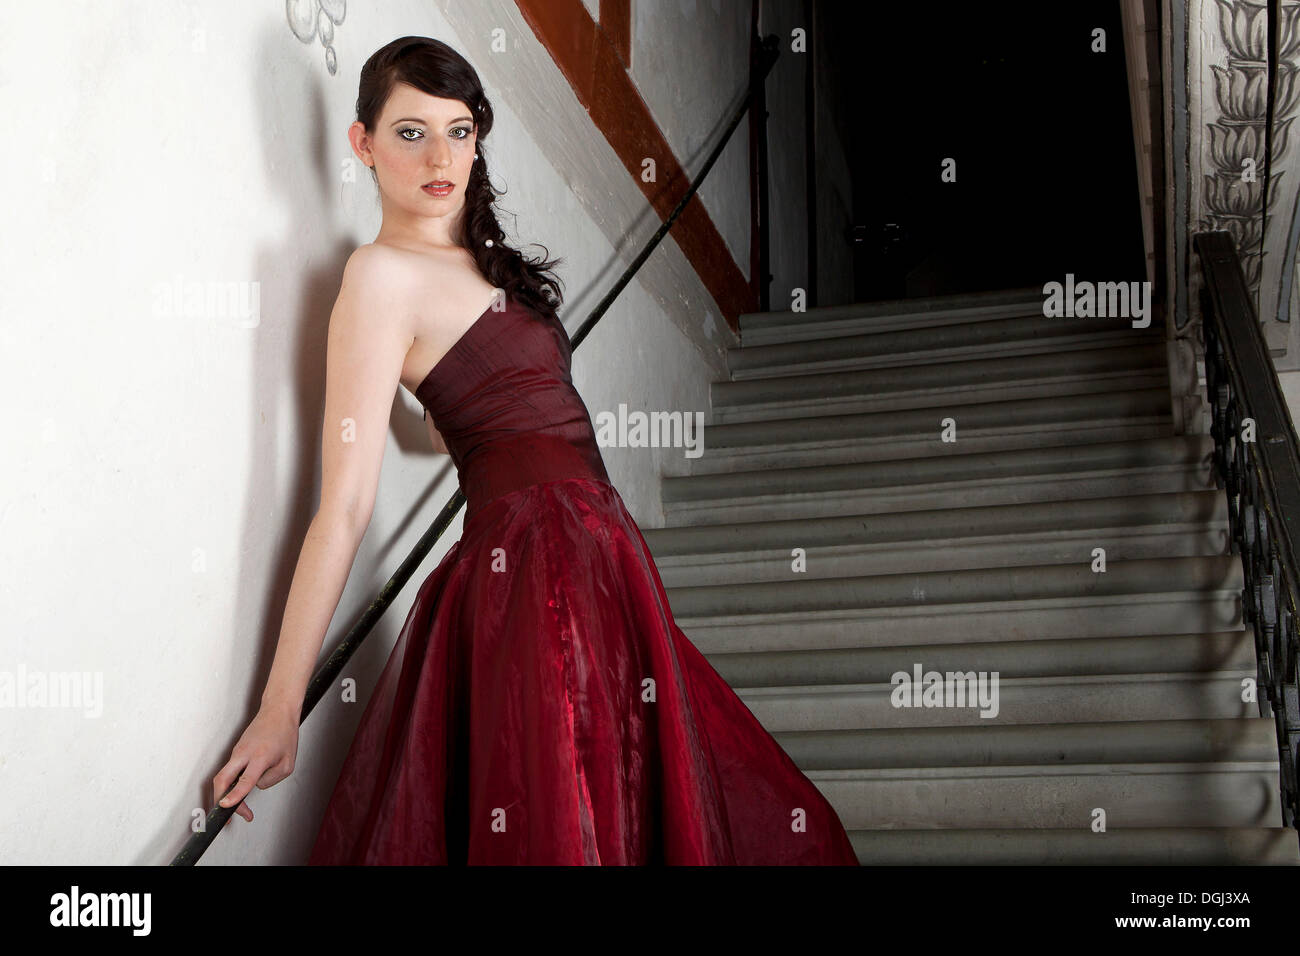 Young woman wearing a red dress standing on the stone stairs in a stairwell Stock Photo